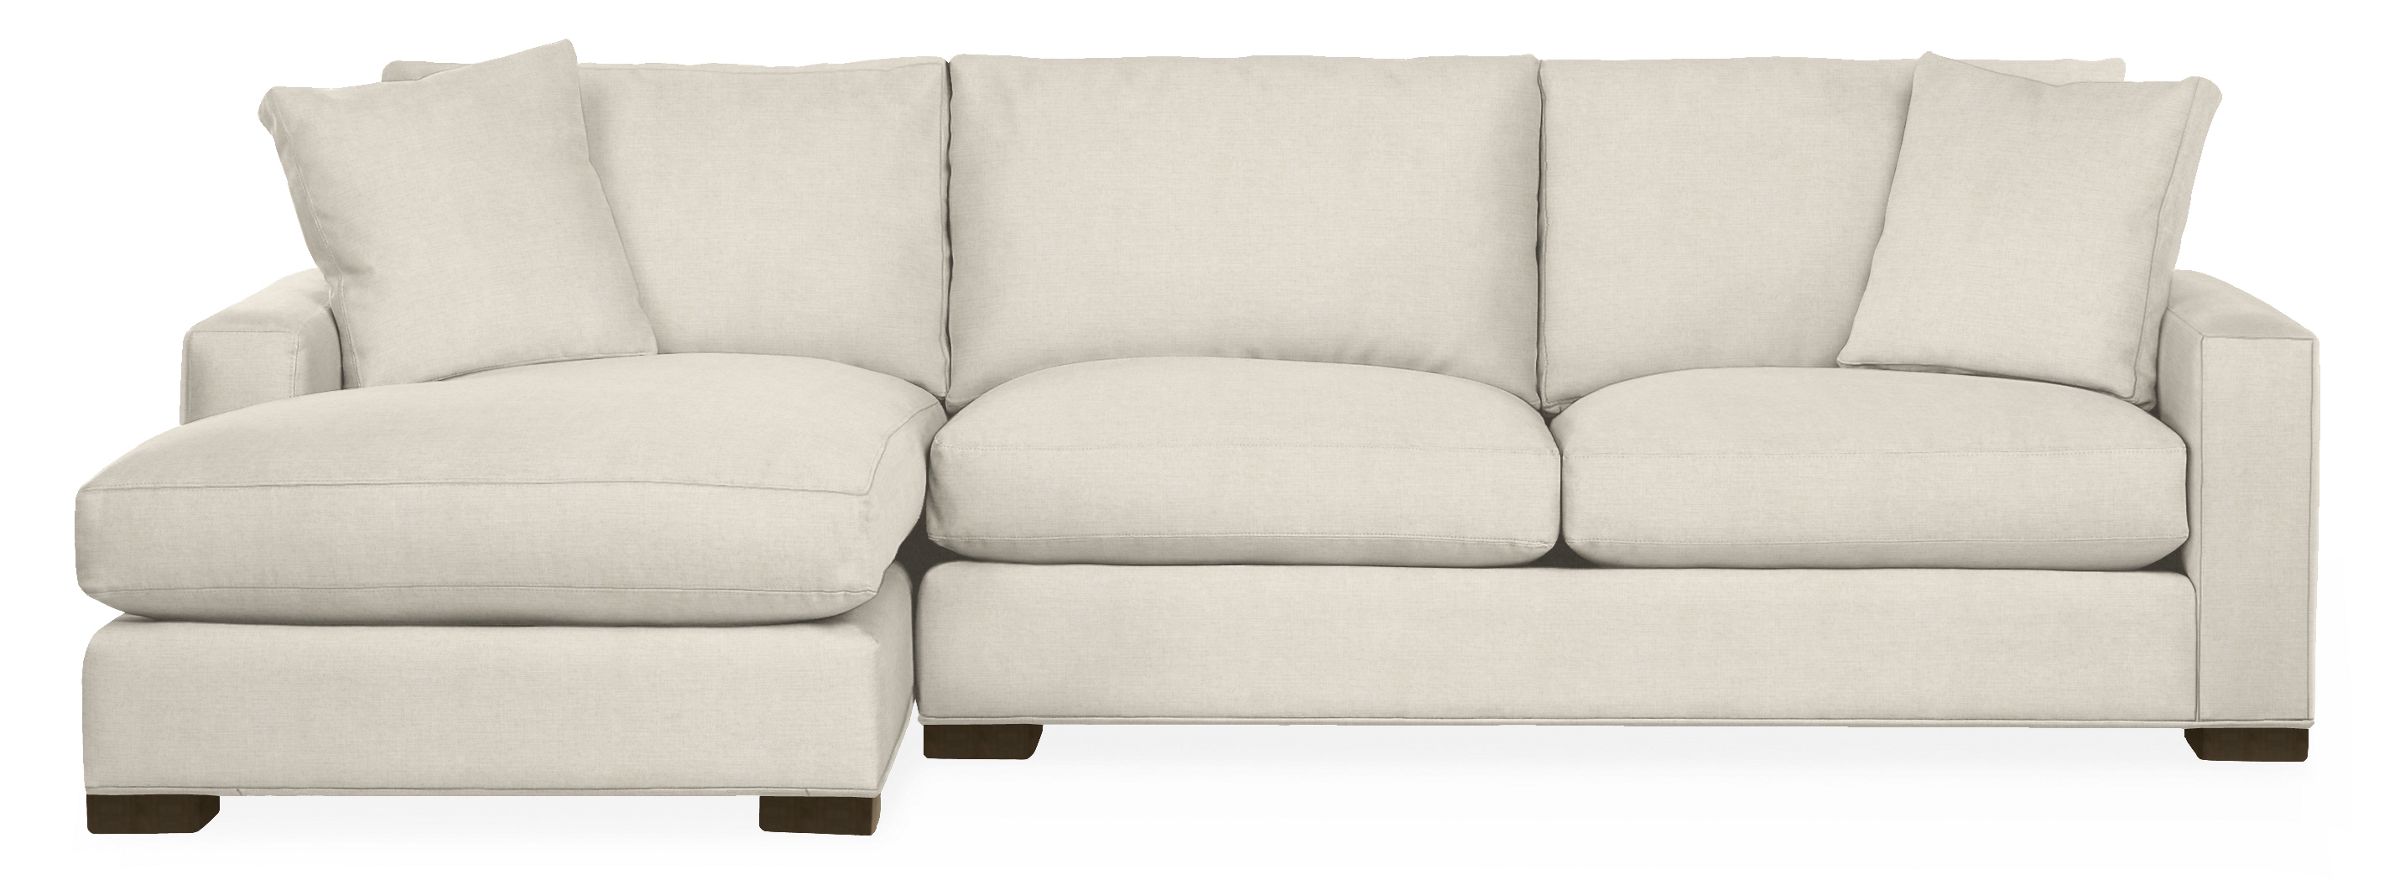 Sofas with Chaise